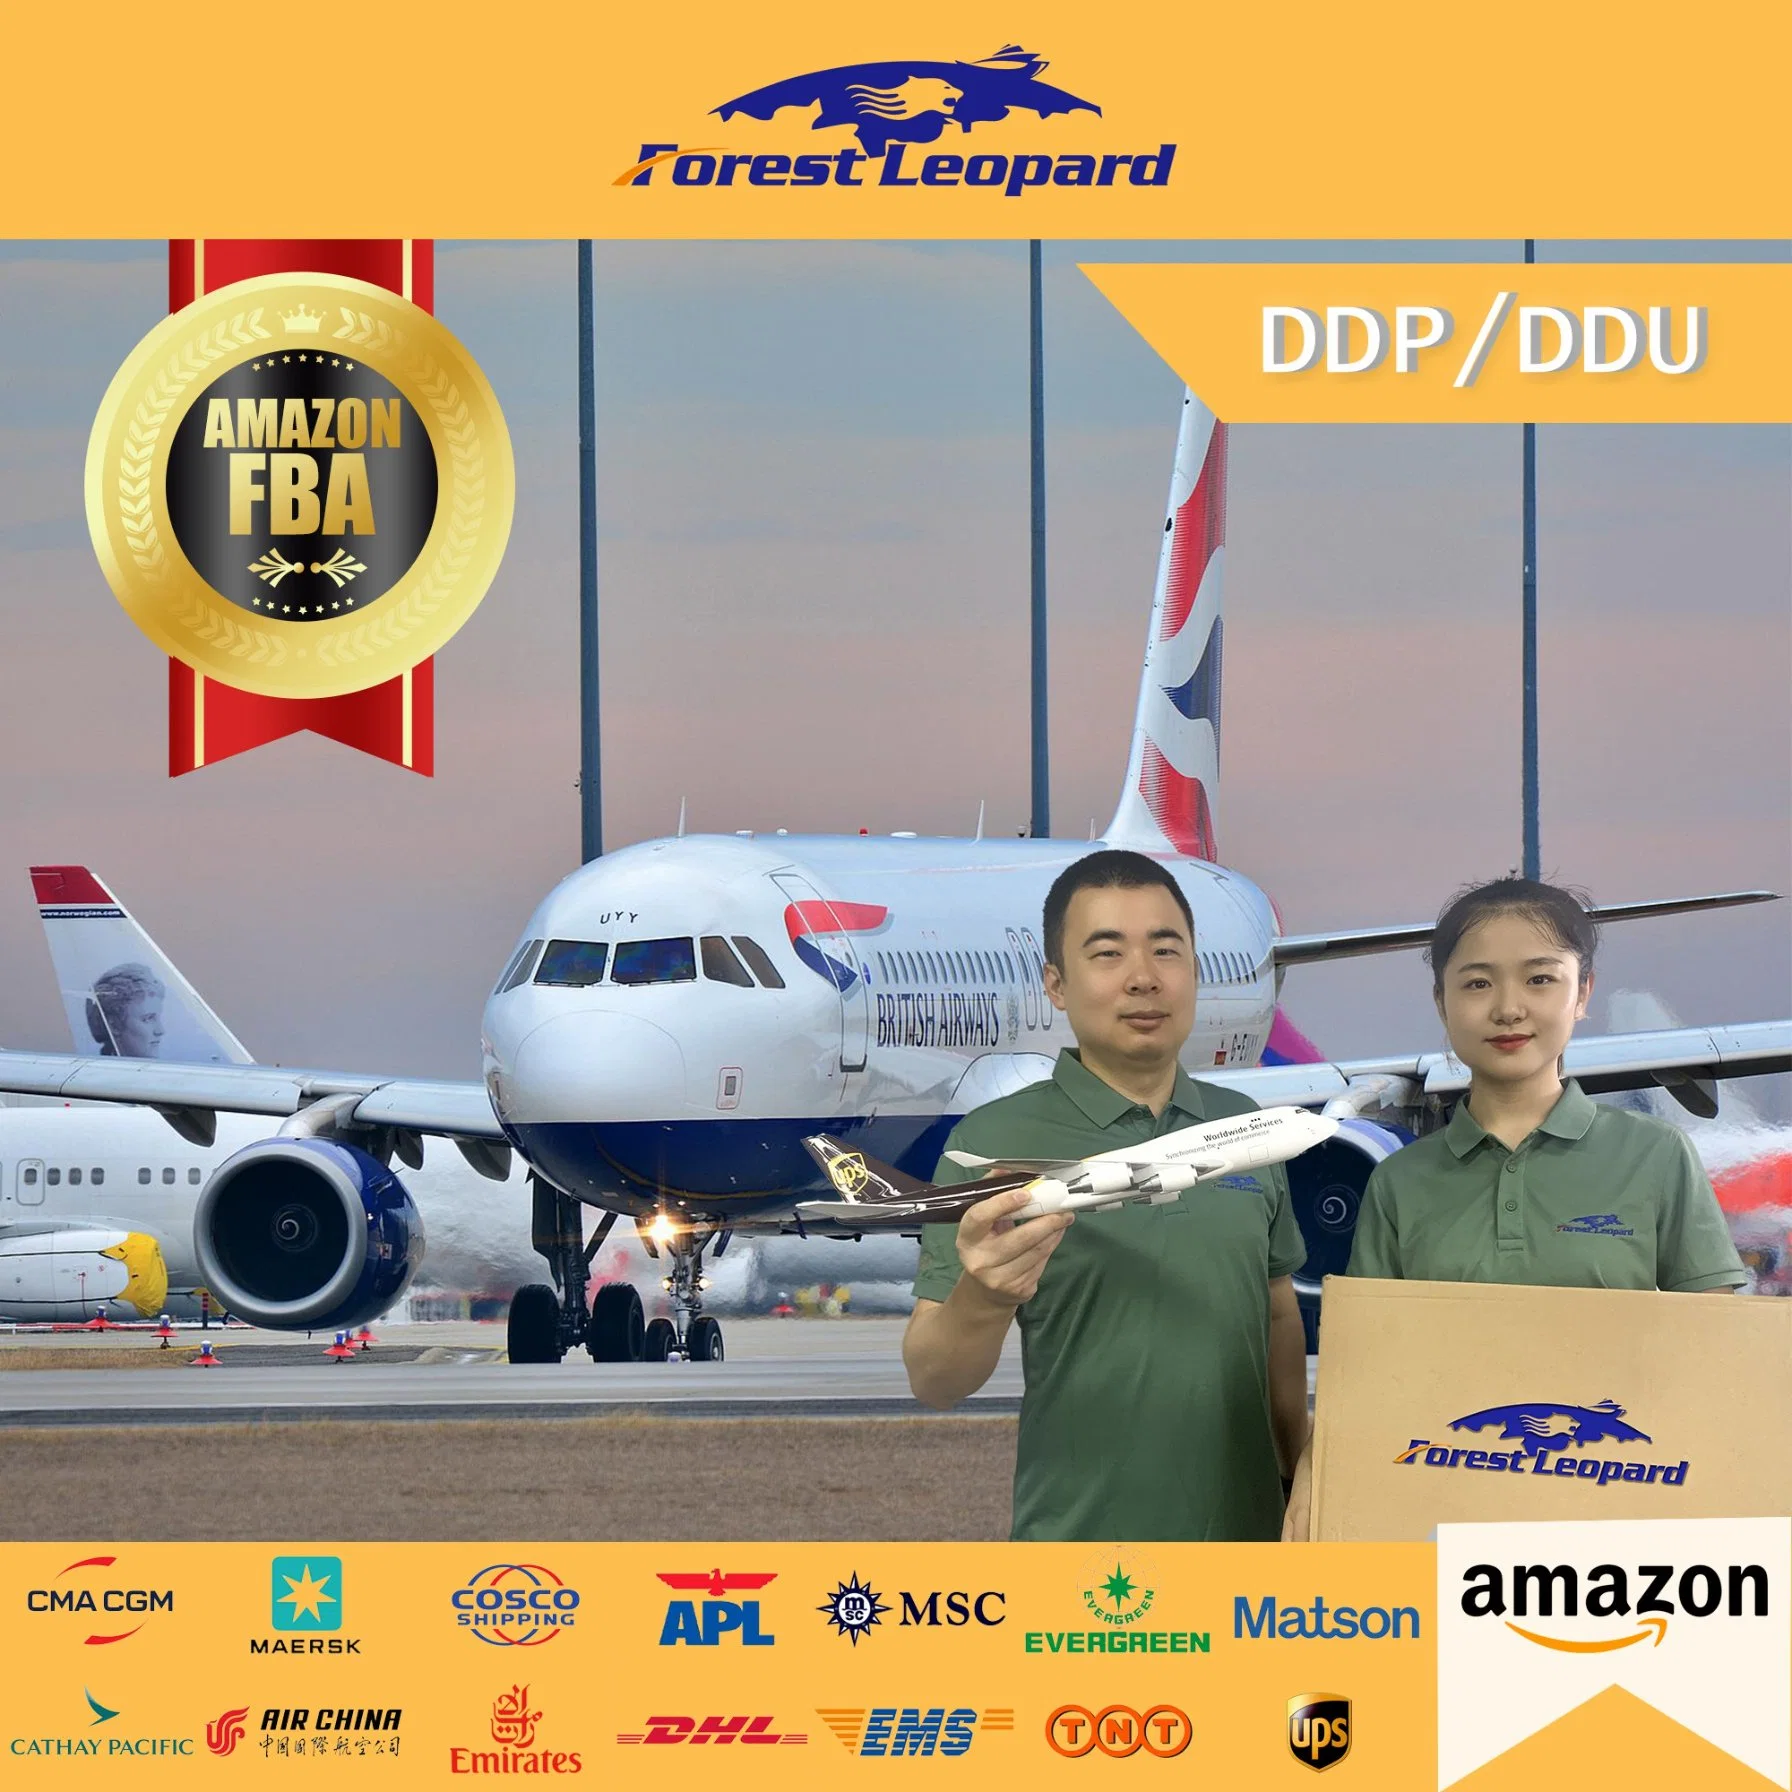 Amazon Fba Services Air Shipping From China to USA Logistics Shipping Rates LCL DDP DDU Forestleopard